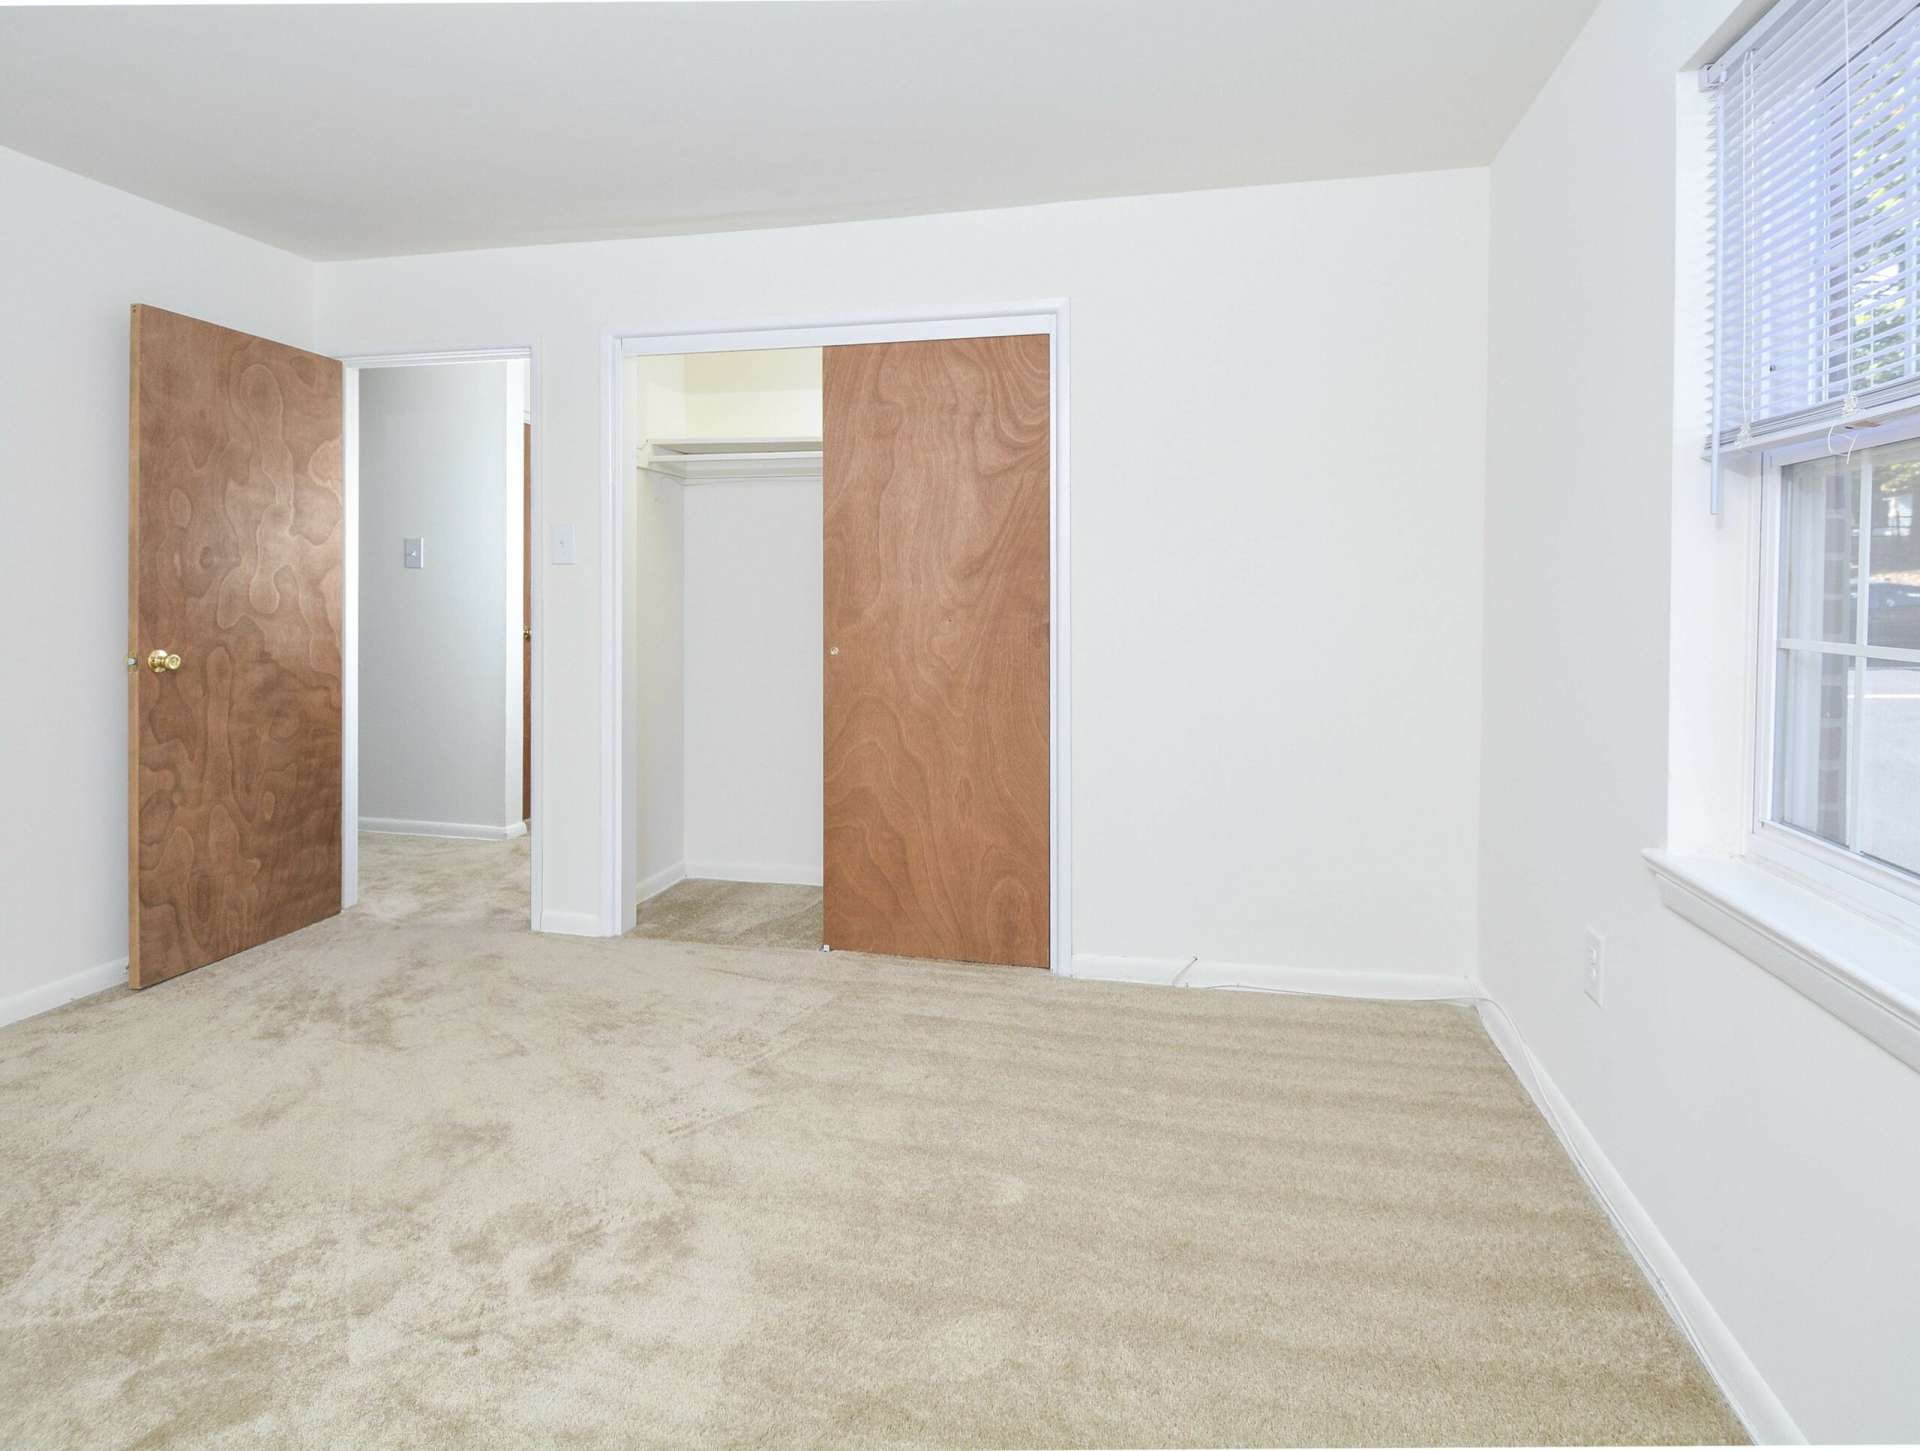 Spacious carpeted bedroom with sliding closet doors and a window.